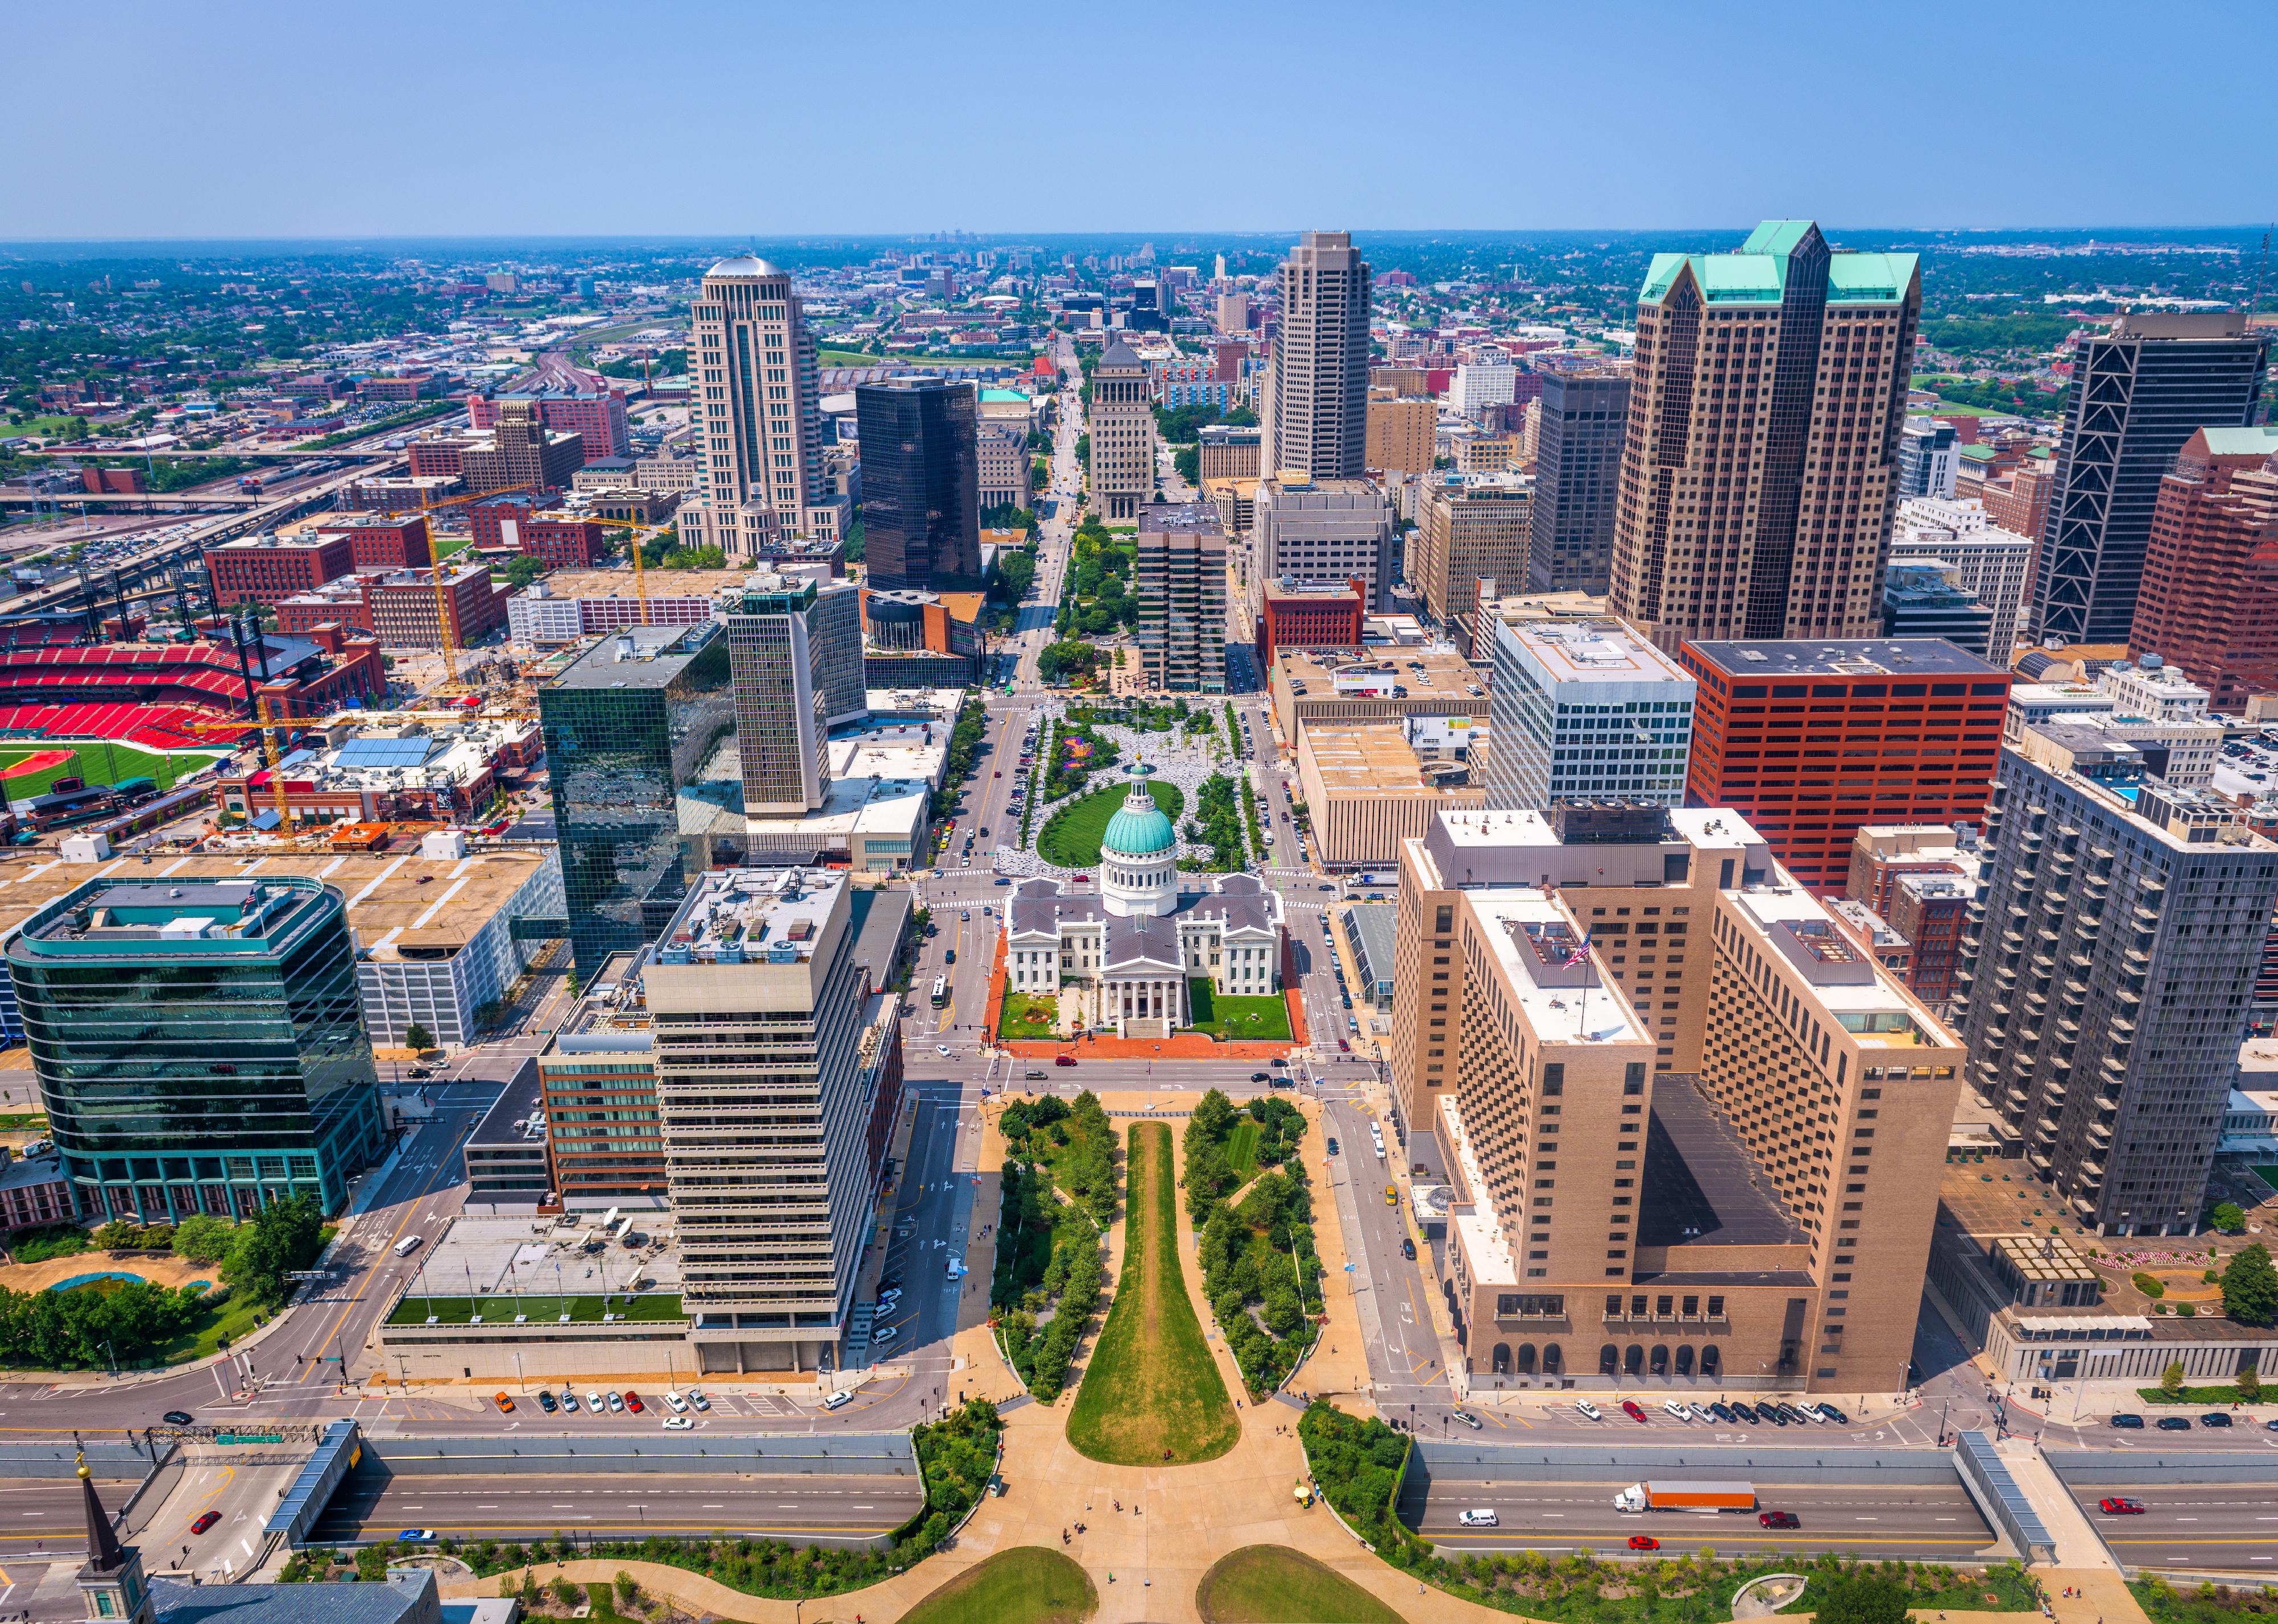 Downtown St. Louis skyline from above.